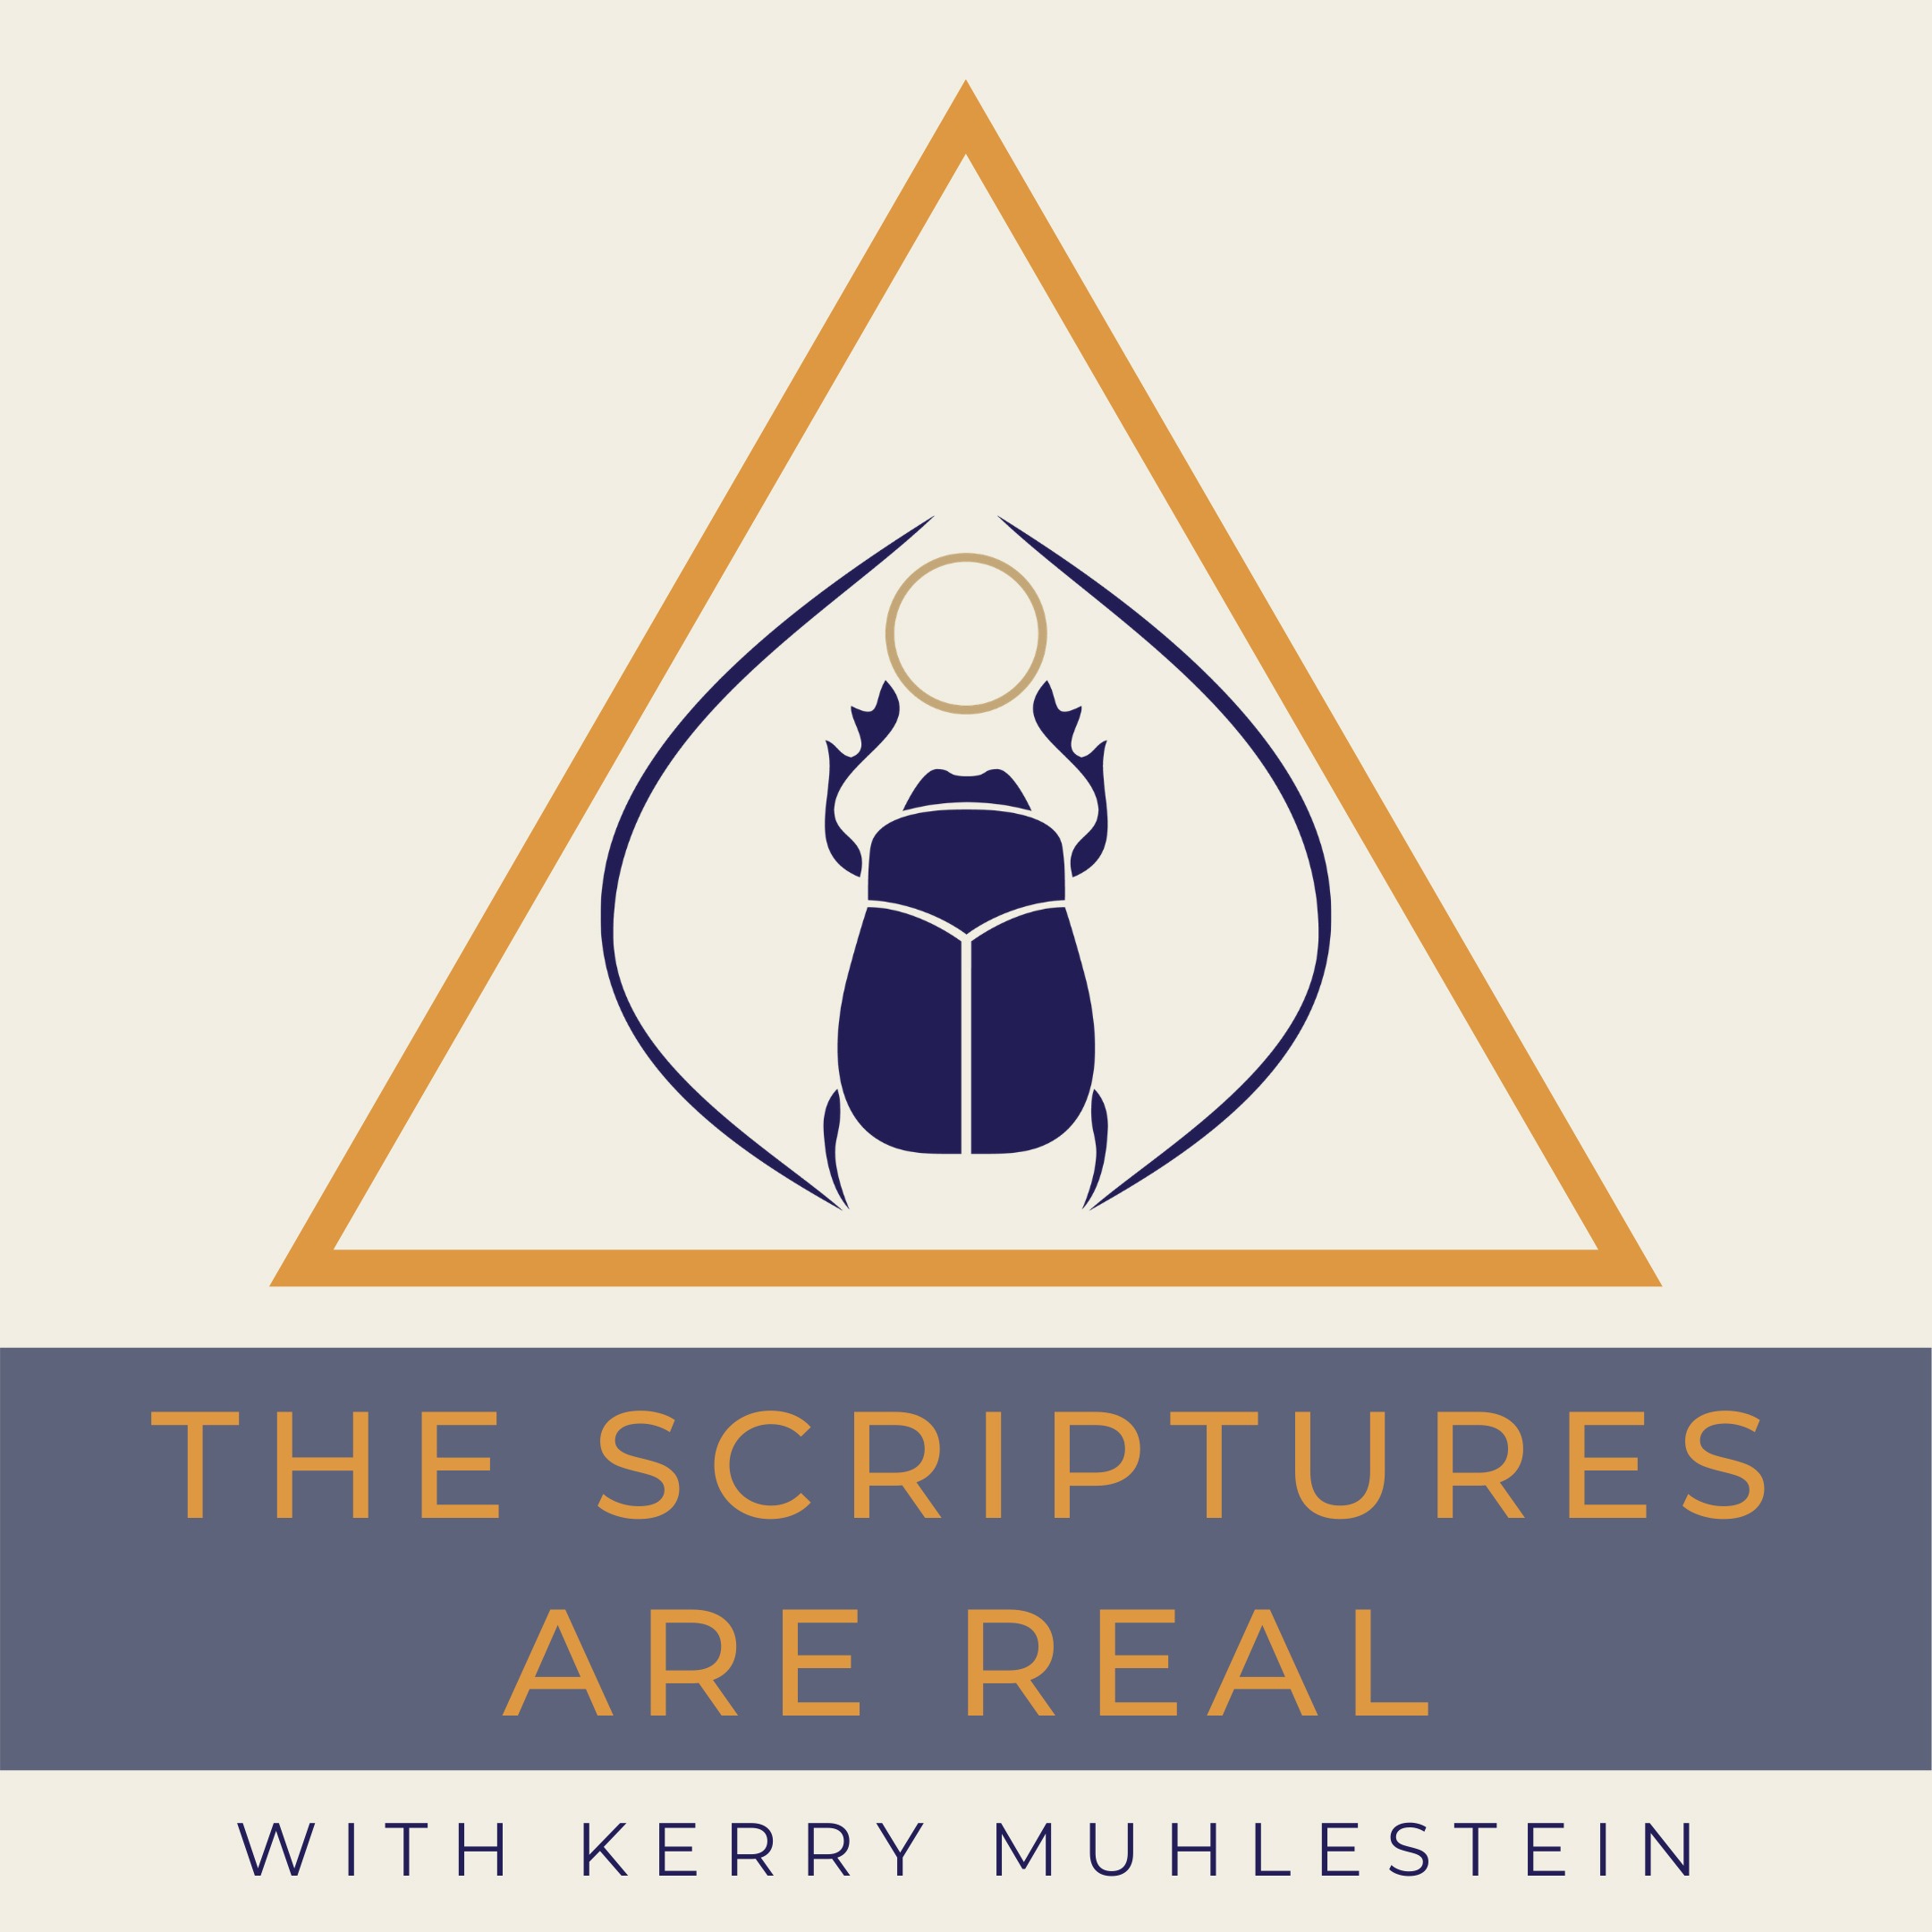 S3 E 15 Getting More from Scriptures with the We Believe App (week of Feb. 5, 3rd episode)